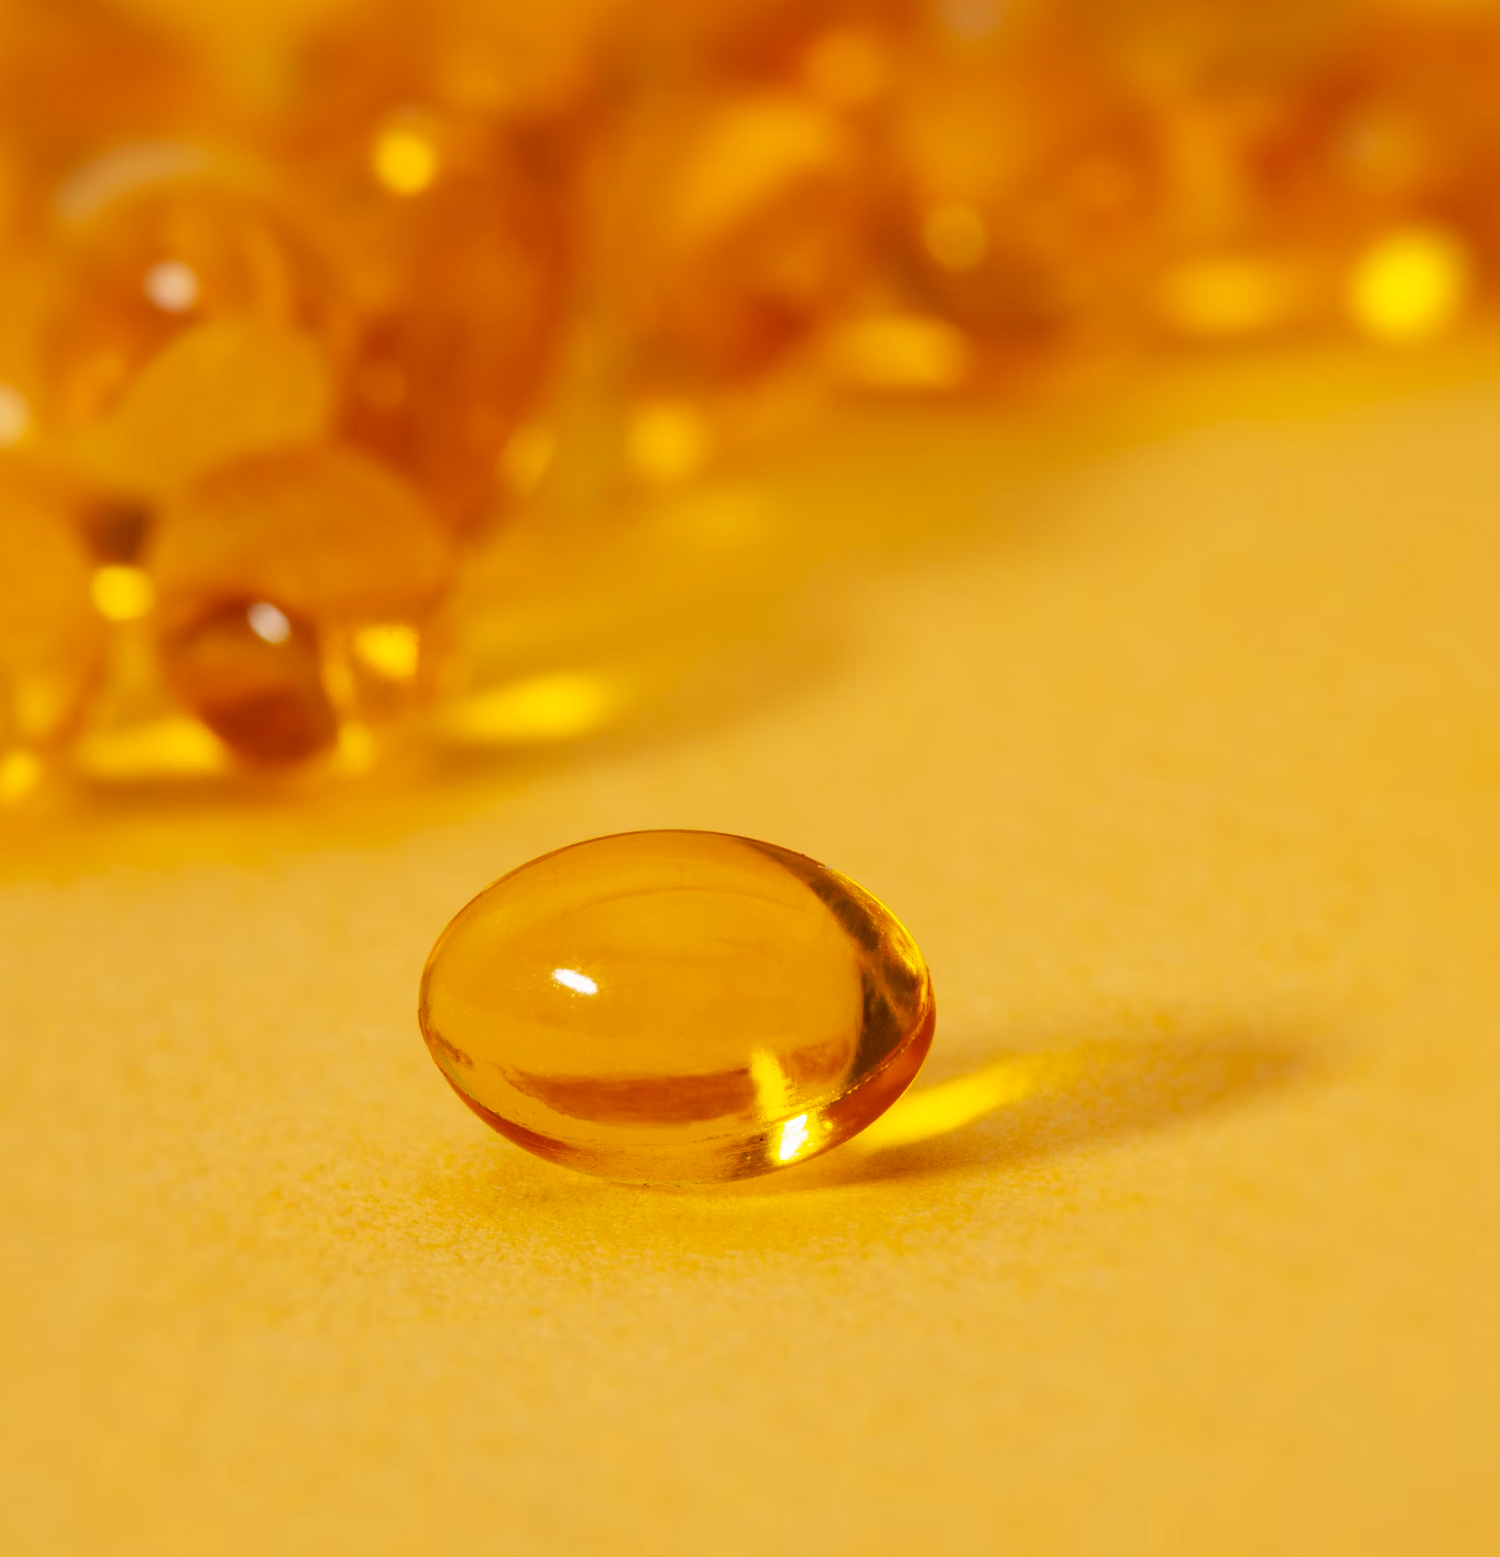 Vitamin D - Why You Are Probably NOT Getting Enough